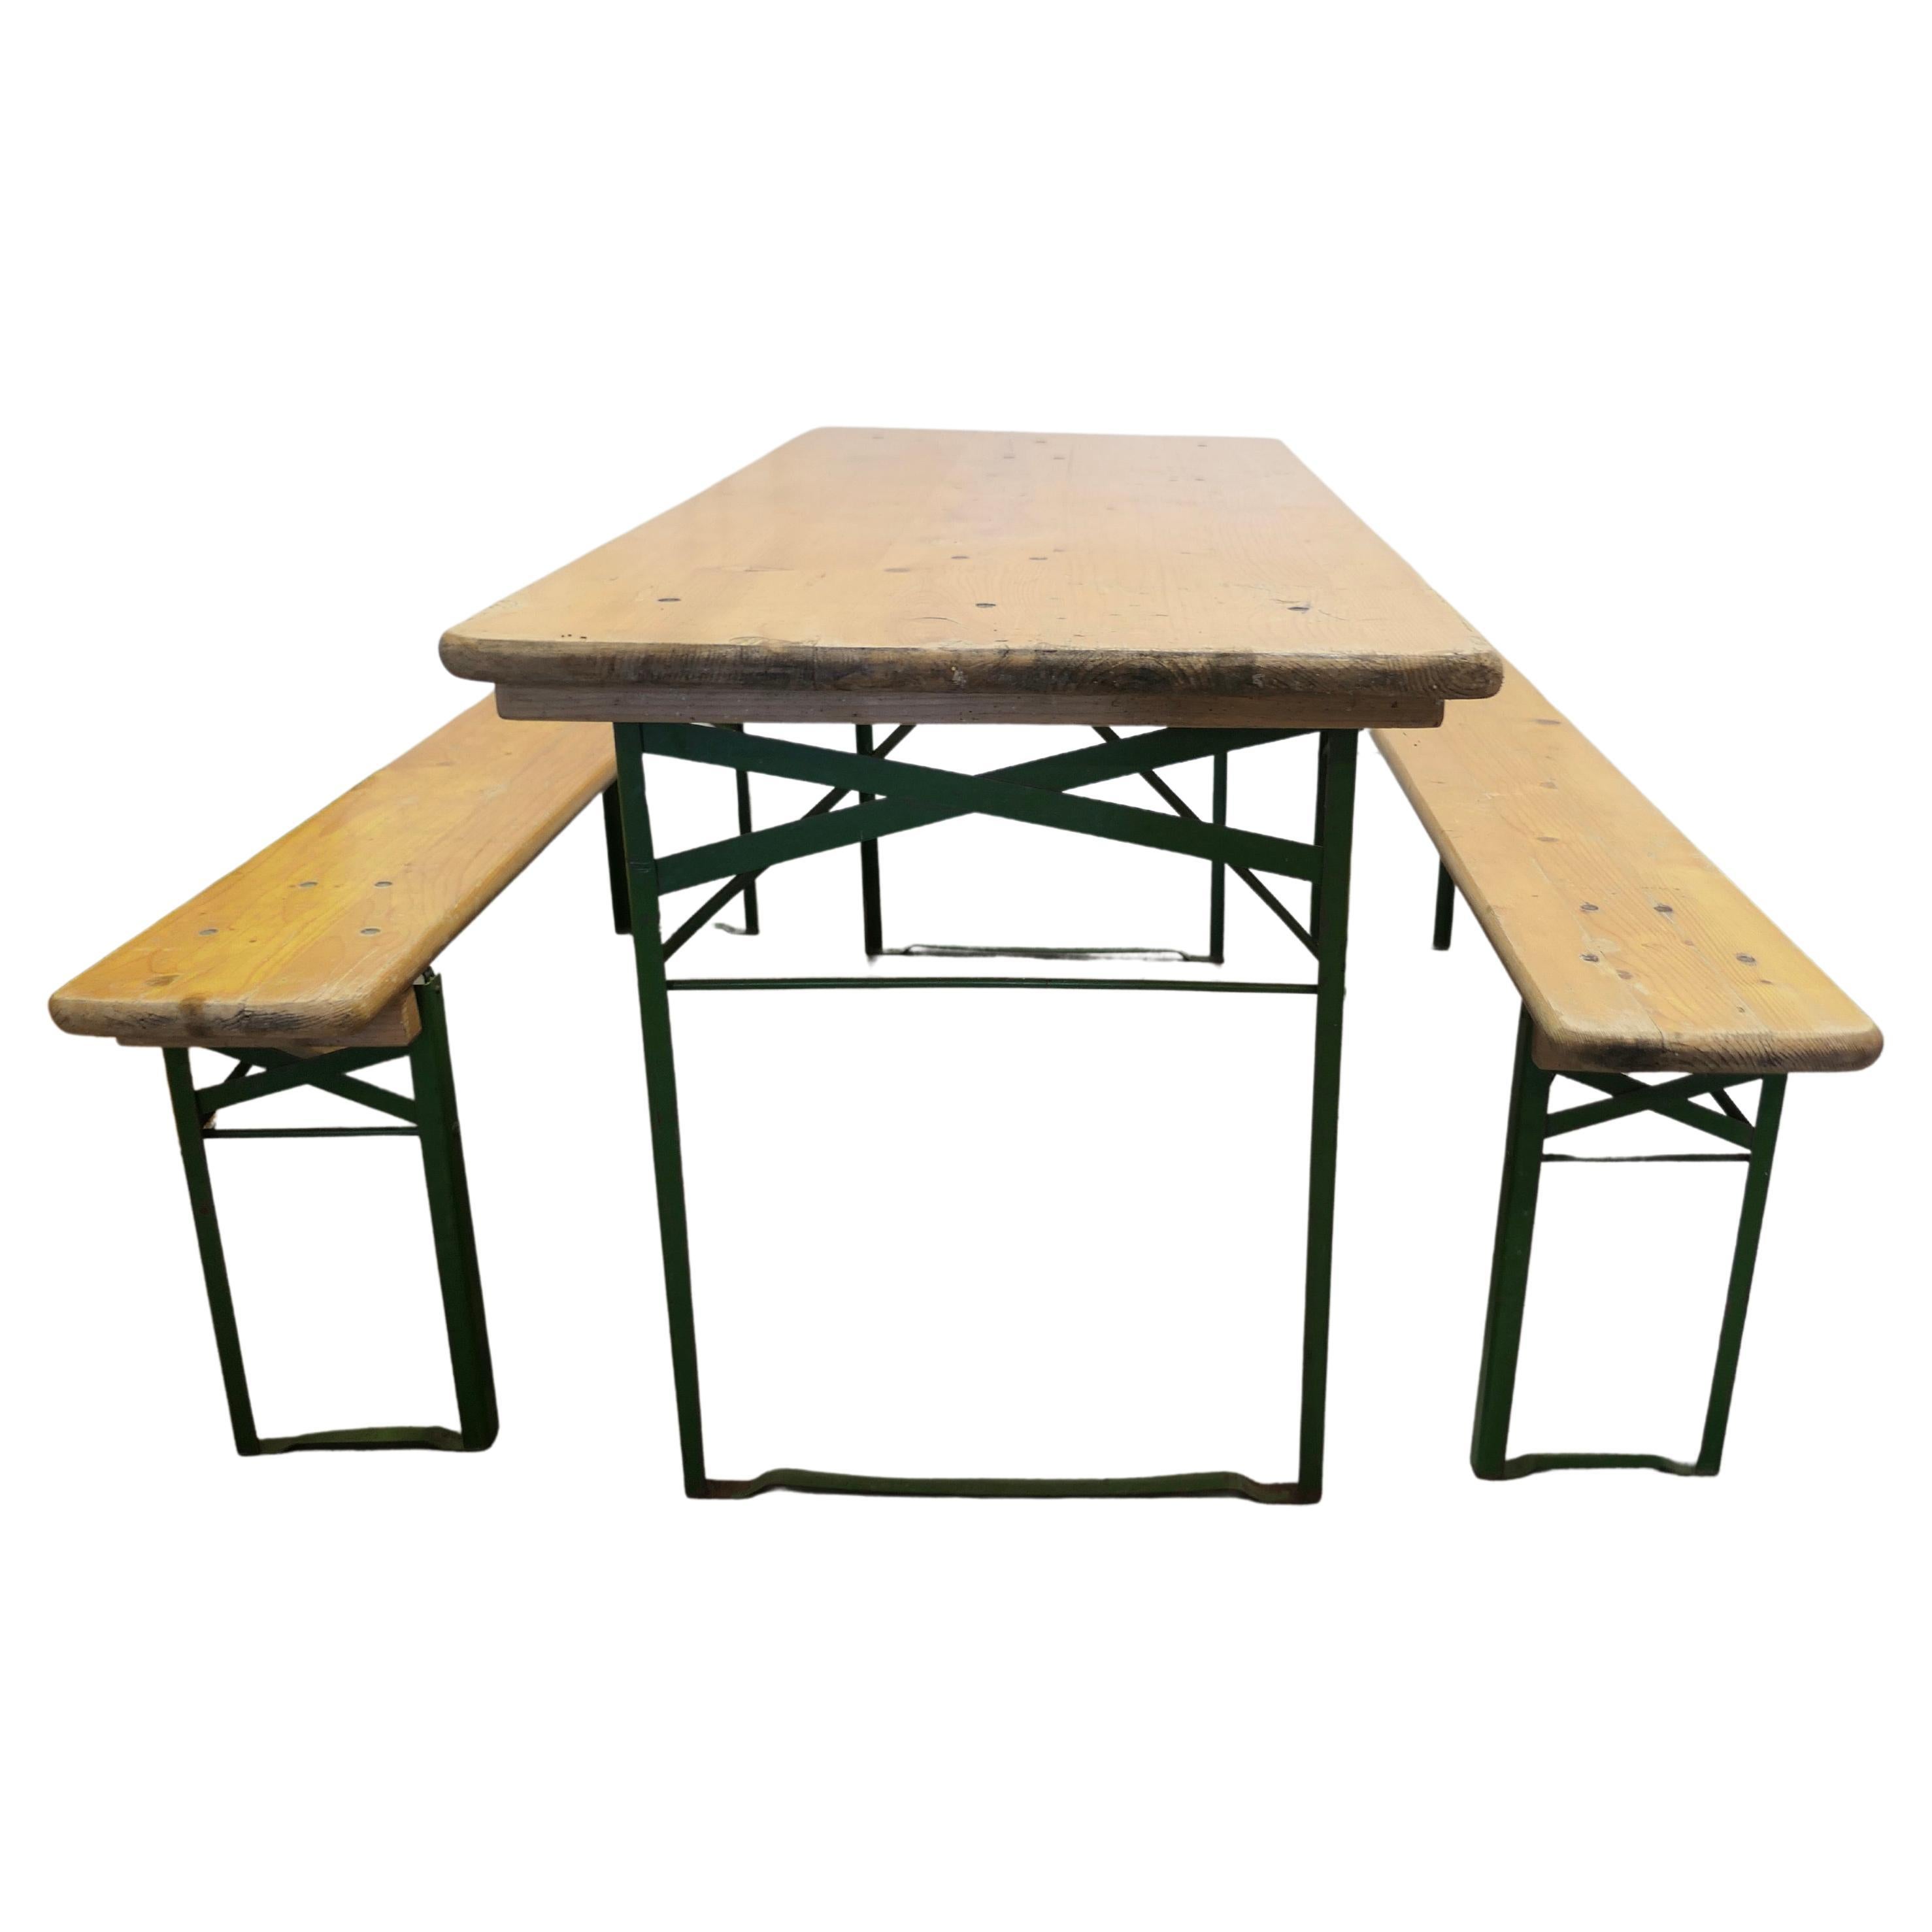 Set of 6ft Pine Picnic Table and Benches We Have 2 of These Available For Sale